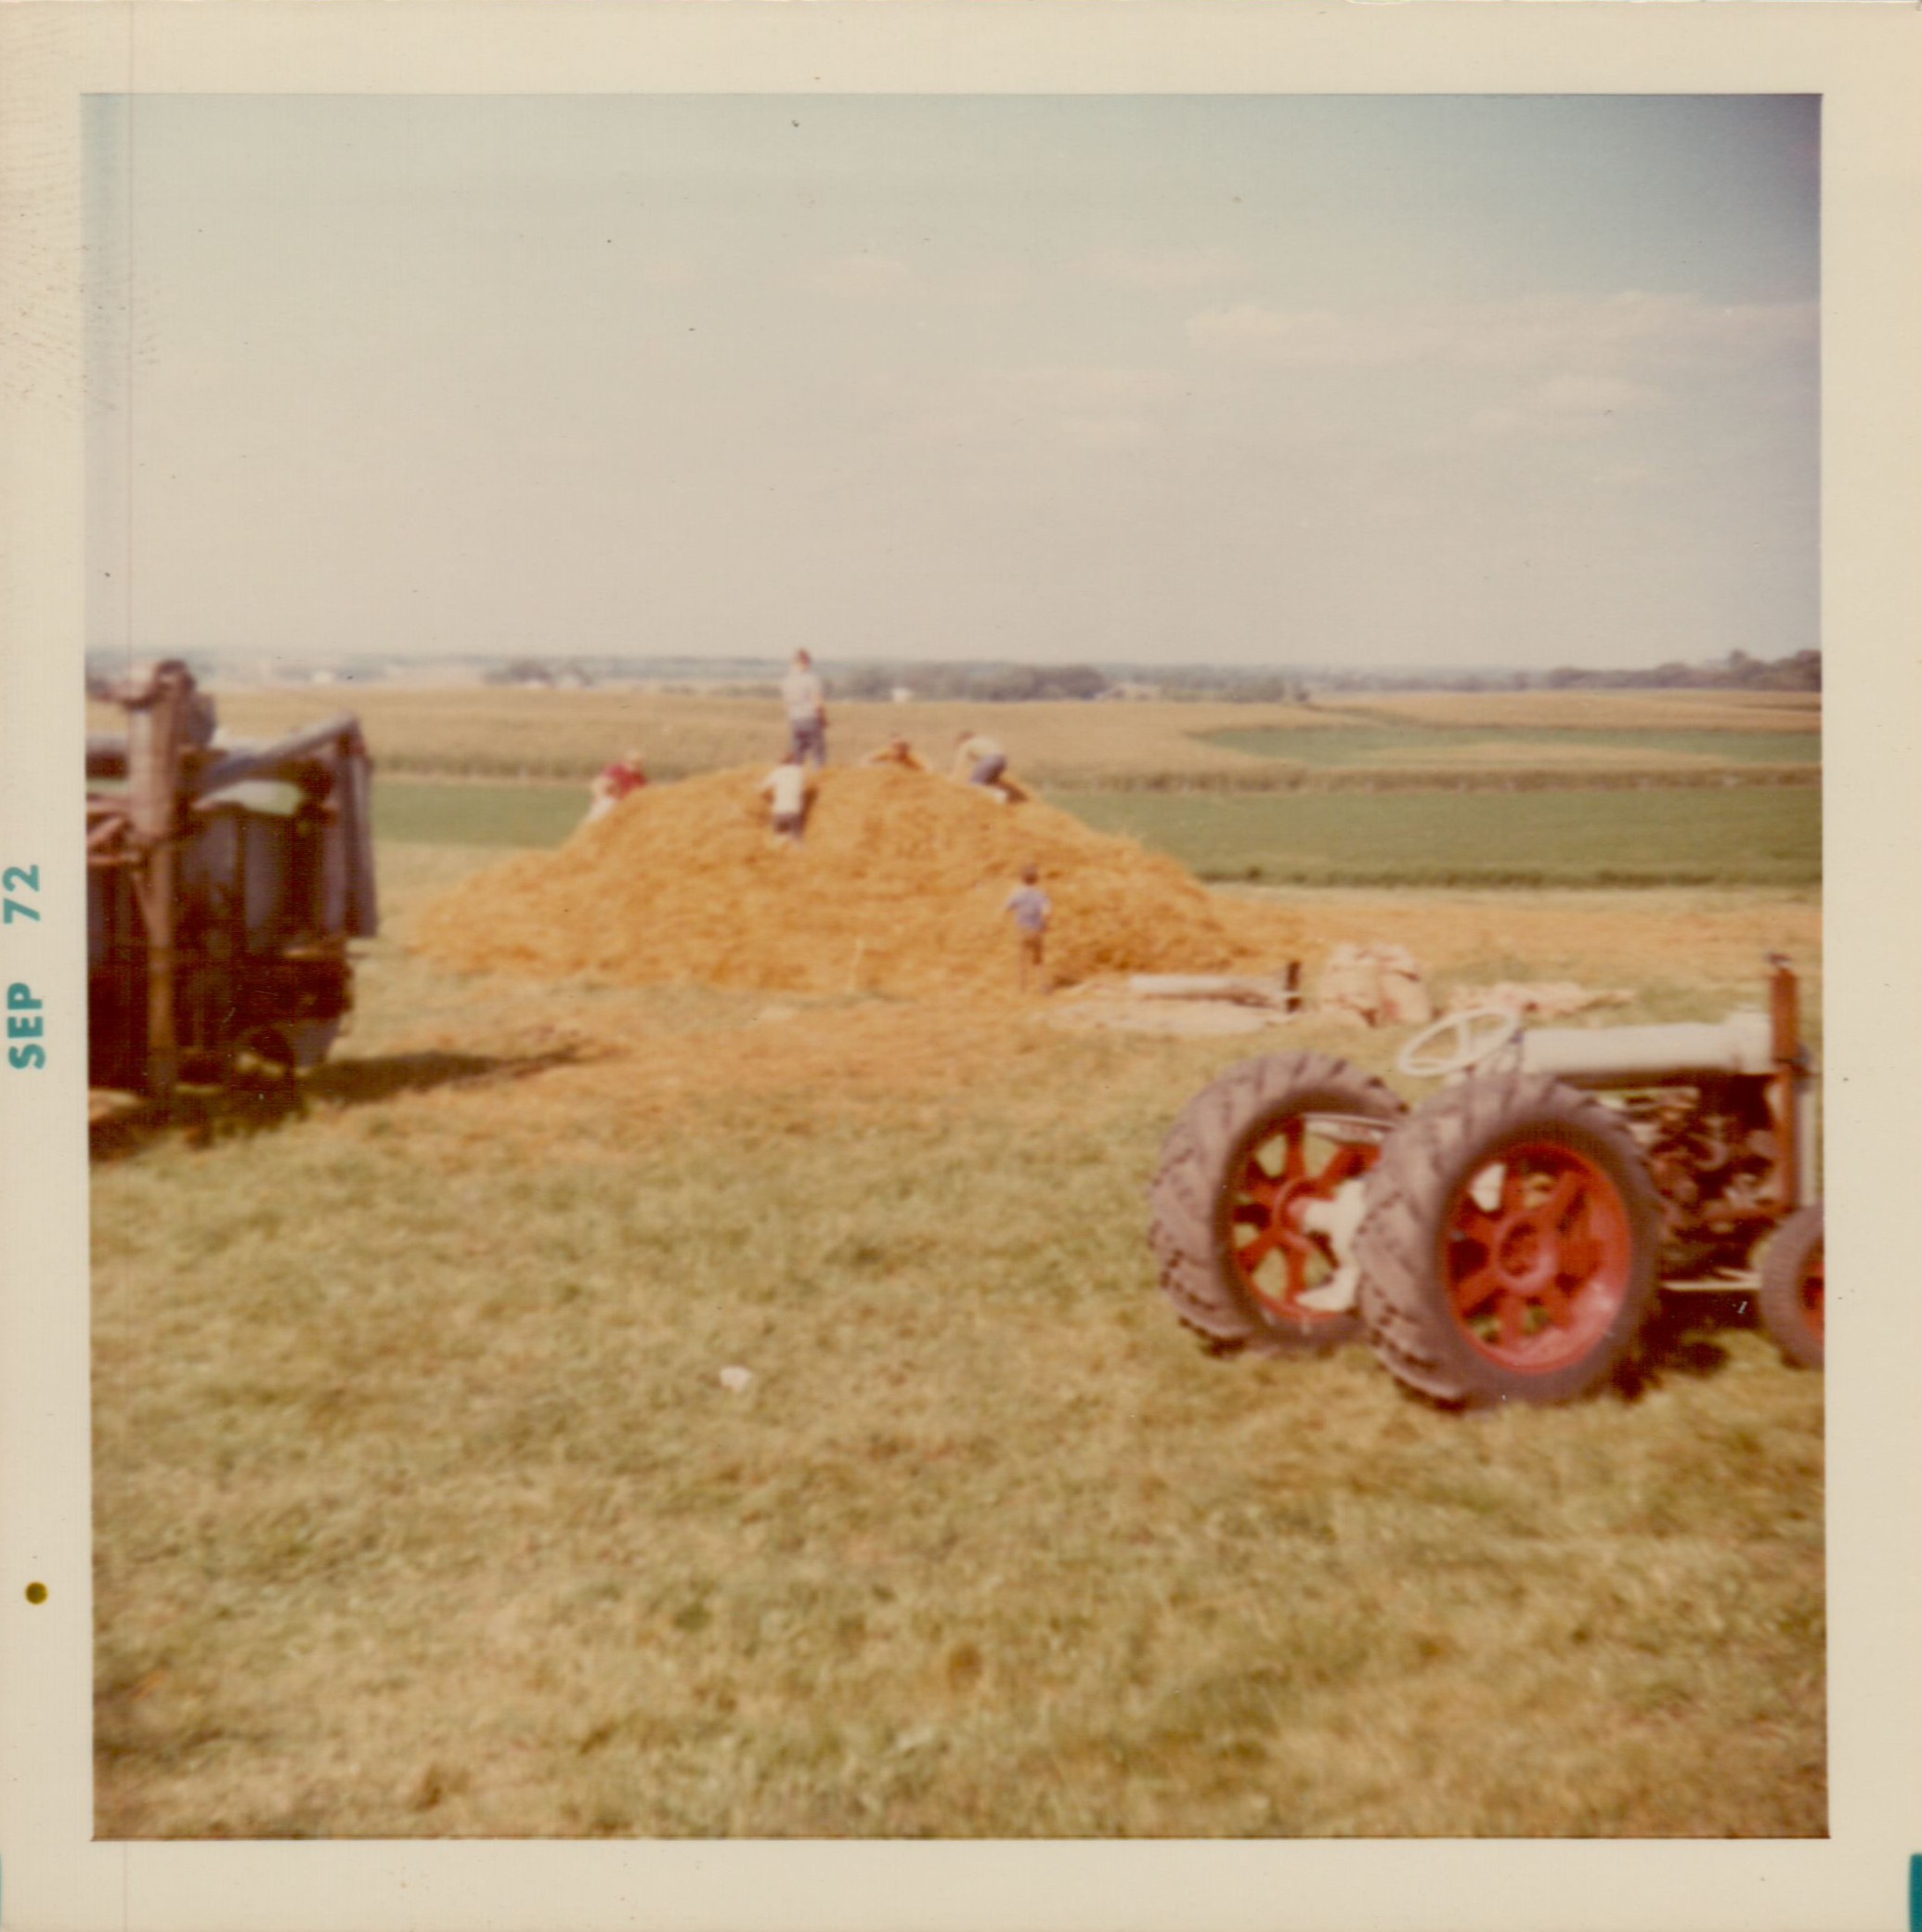 A picture from the 1972 Rogers threshing show. Children play in the straw pile created by the rescued thresher.